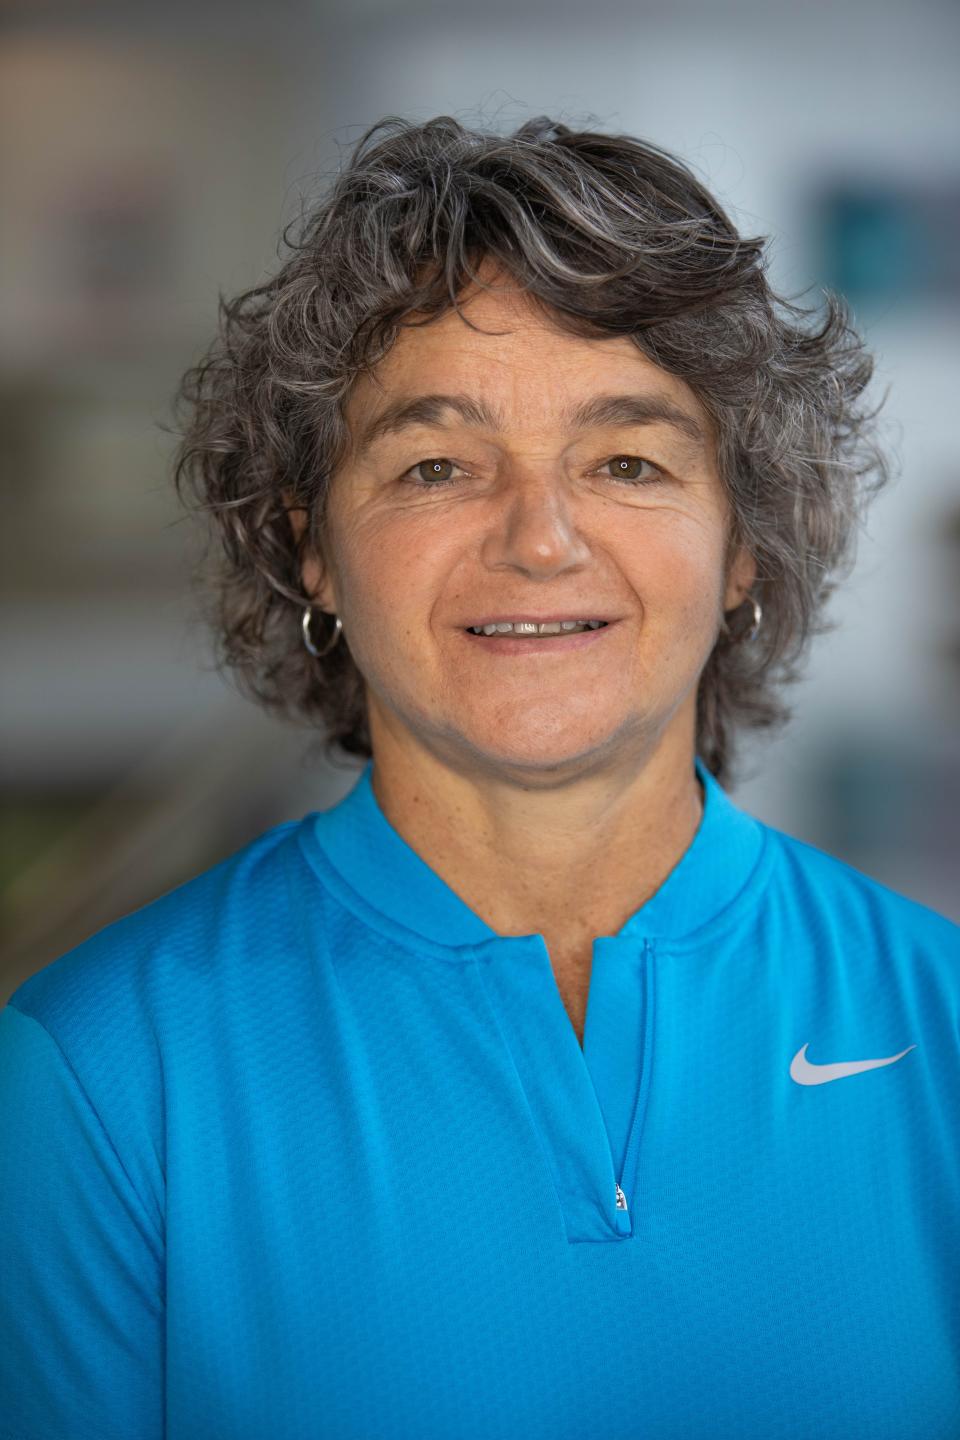 Jan Auger is the first female General Manager of Golf for the City, supervising and overseeing operations and maintenance of the City’s two golf courses.